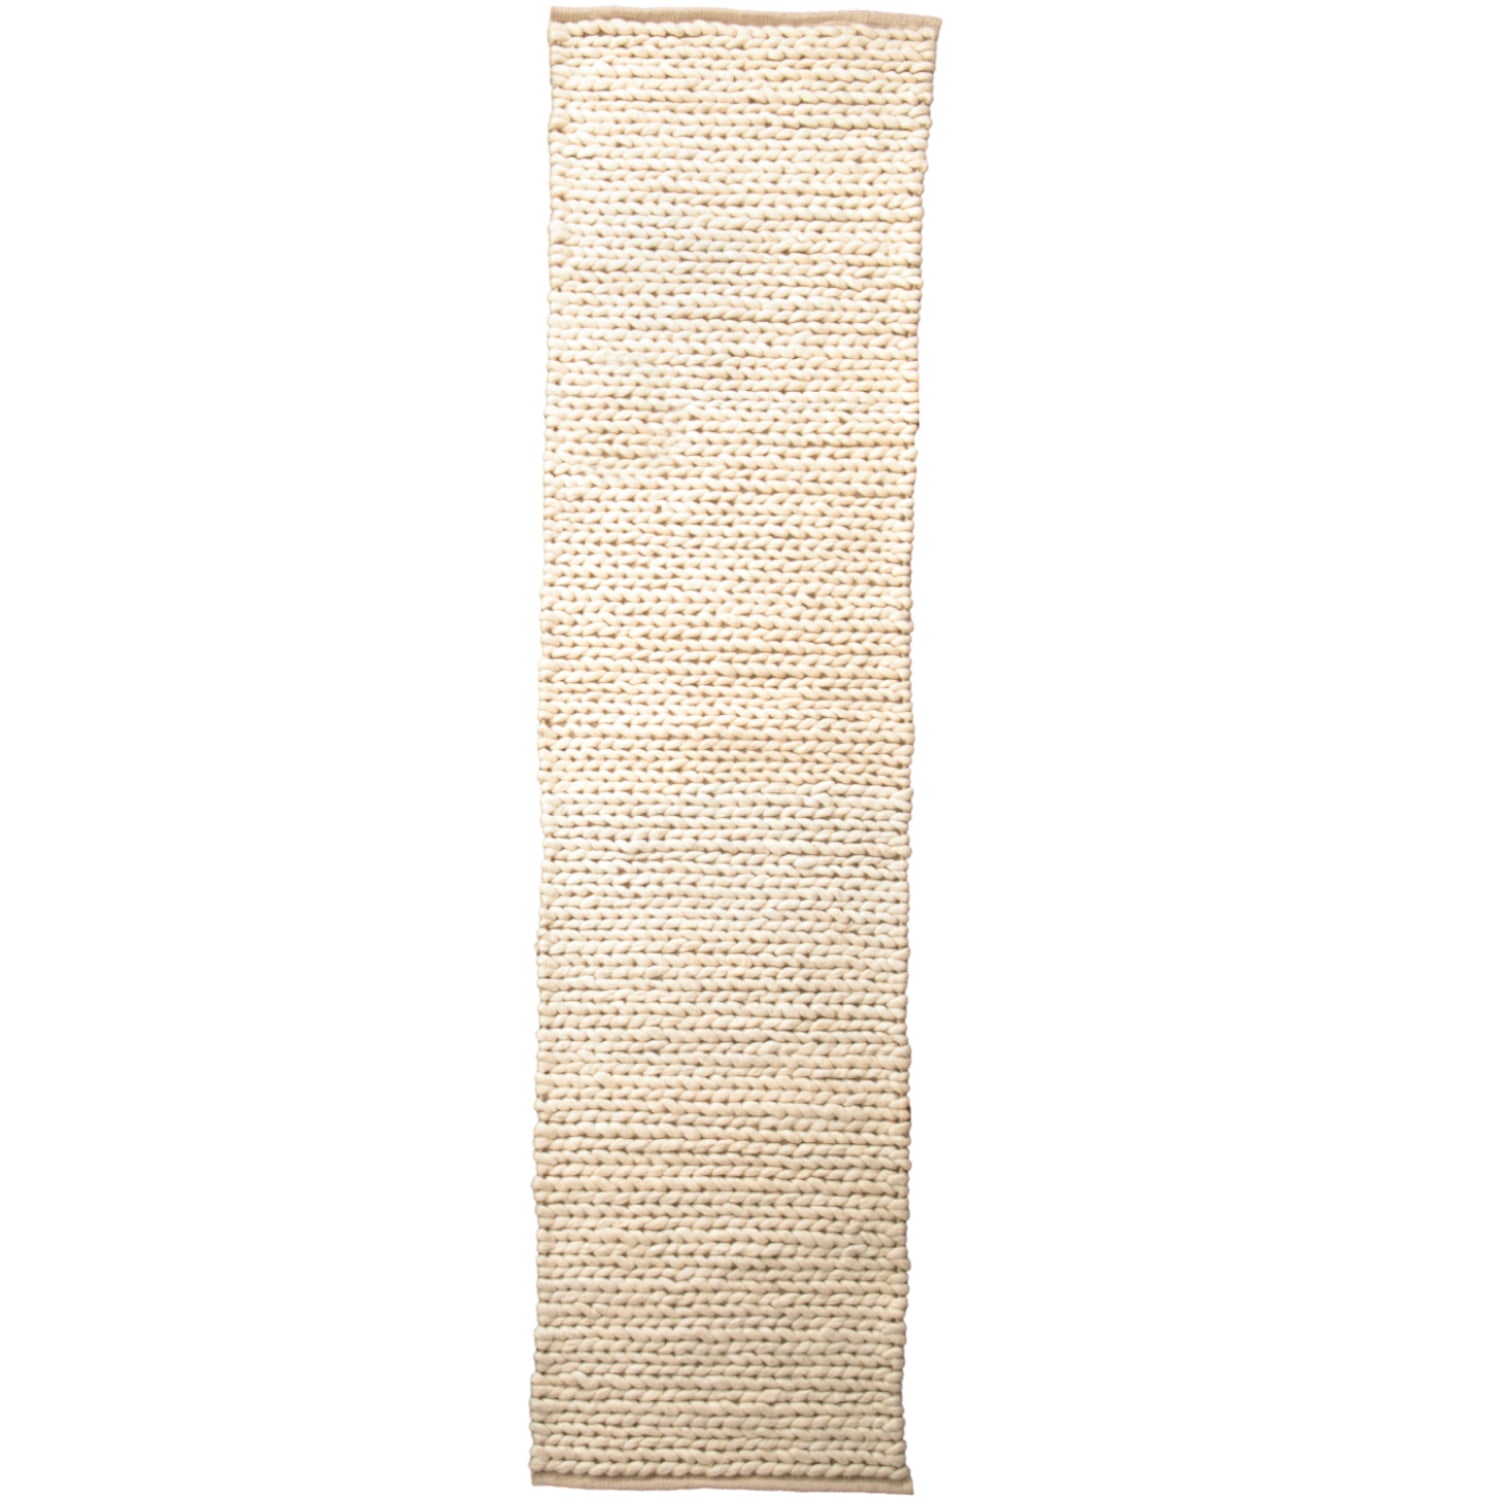 Cream knitted wool rug by Native